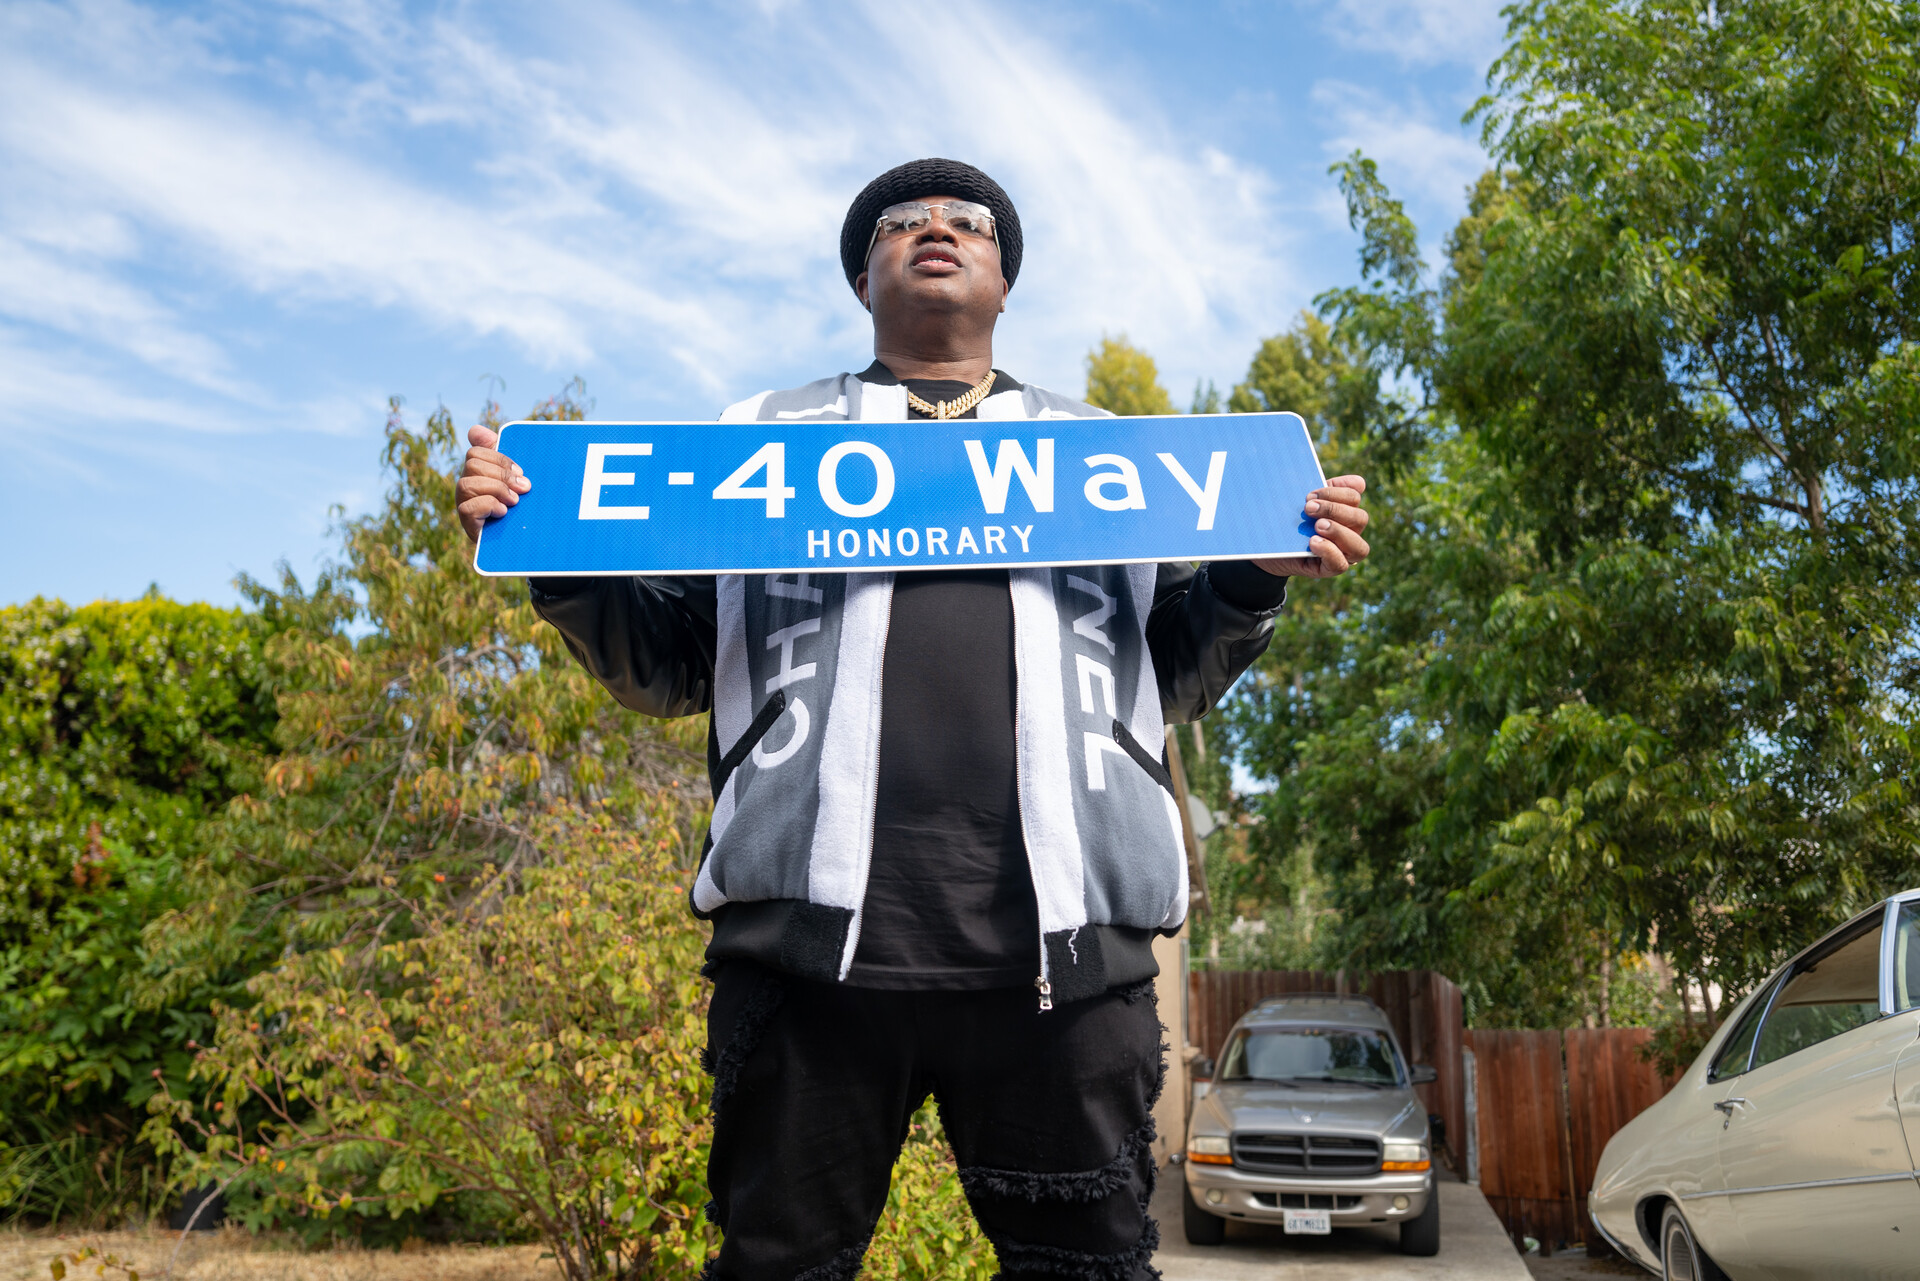 An African American man holds a sign up that says "E-40 Way."